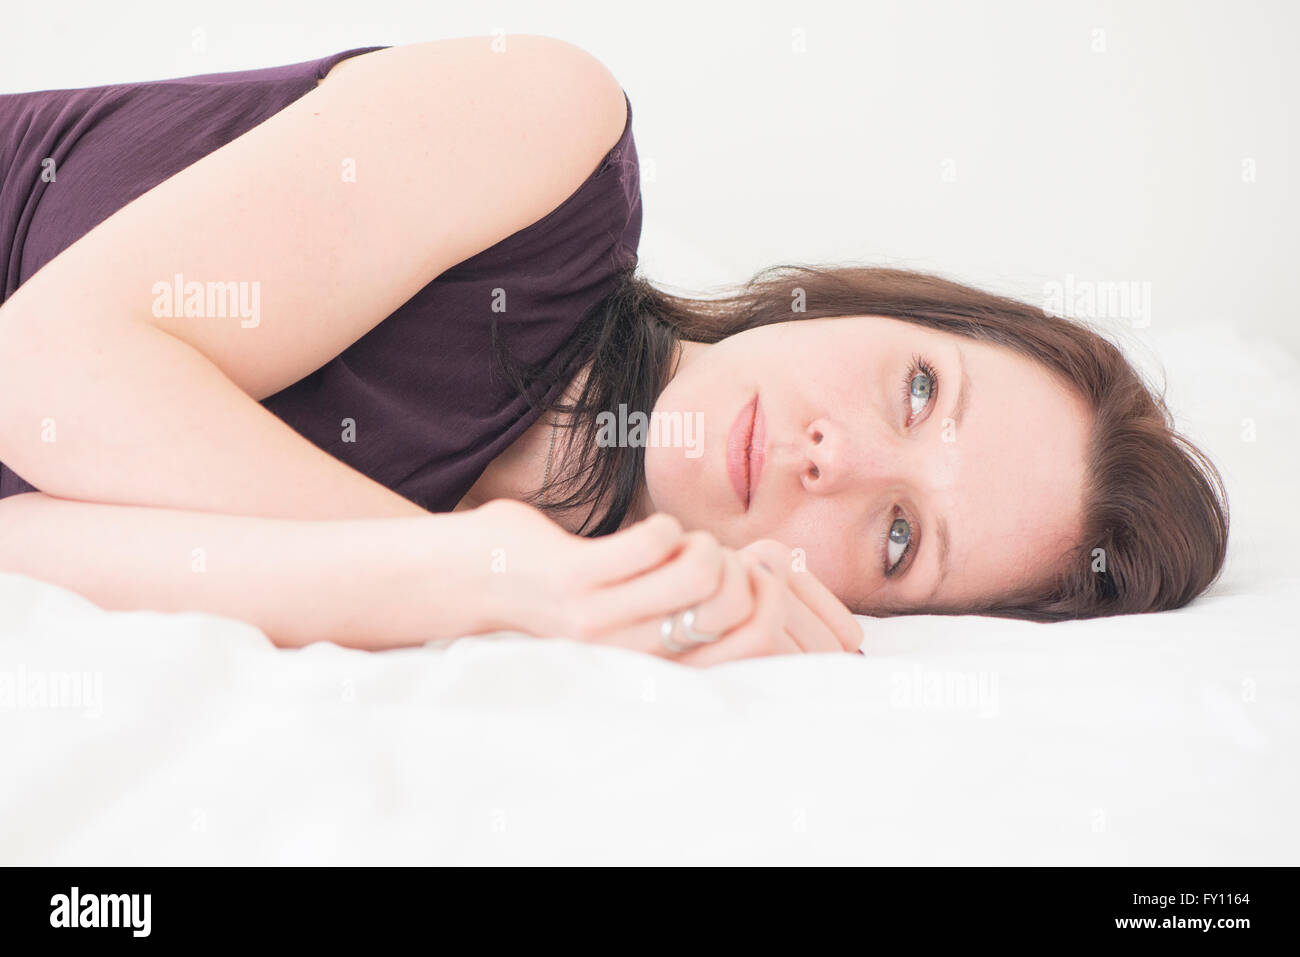 Portrait of young woman lying down in her bed resting. She is looking away with a serious and pensive expression. Stock Photo